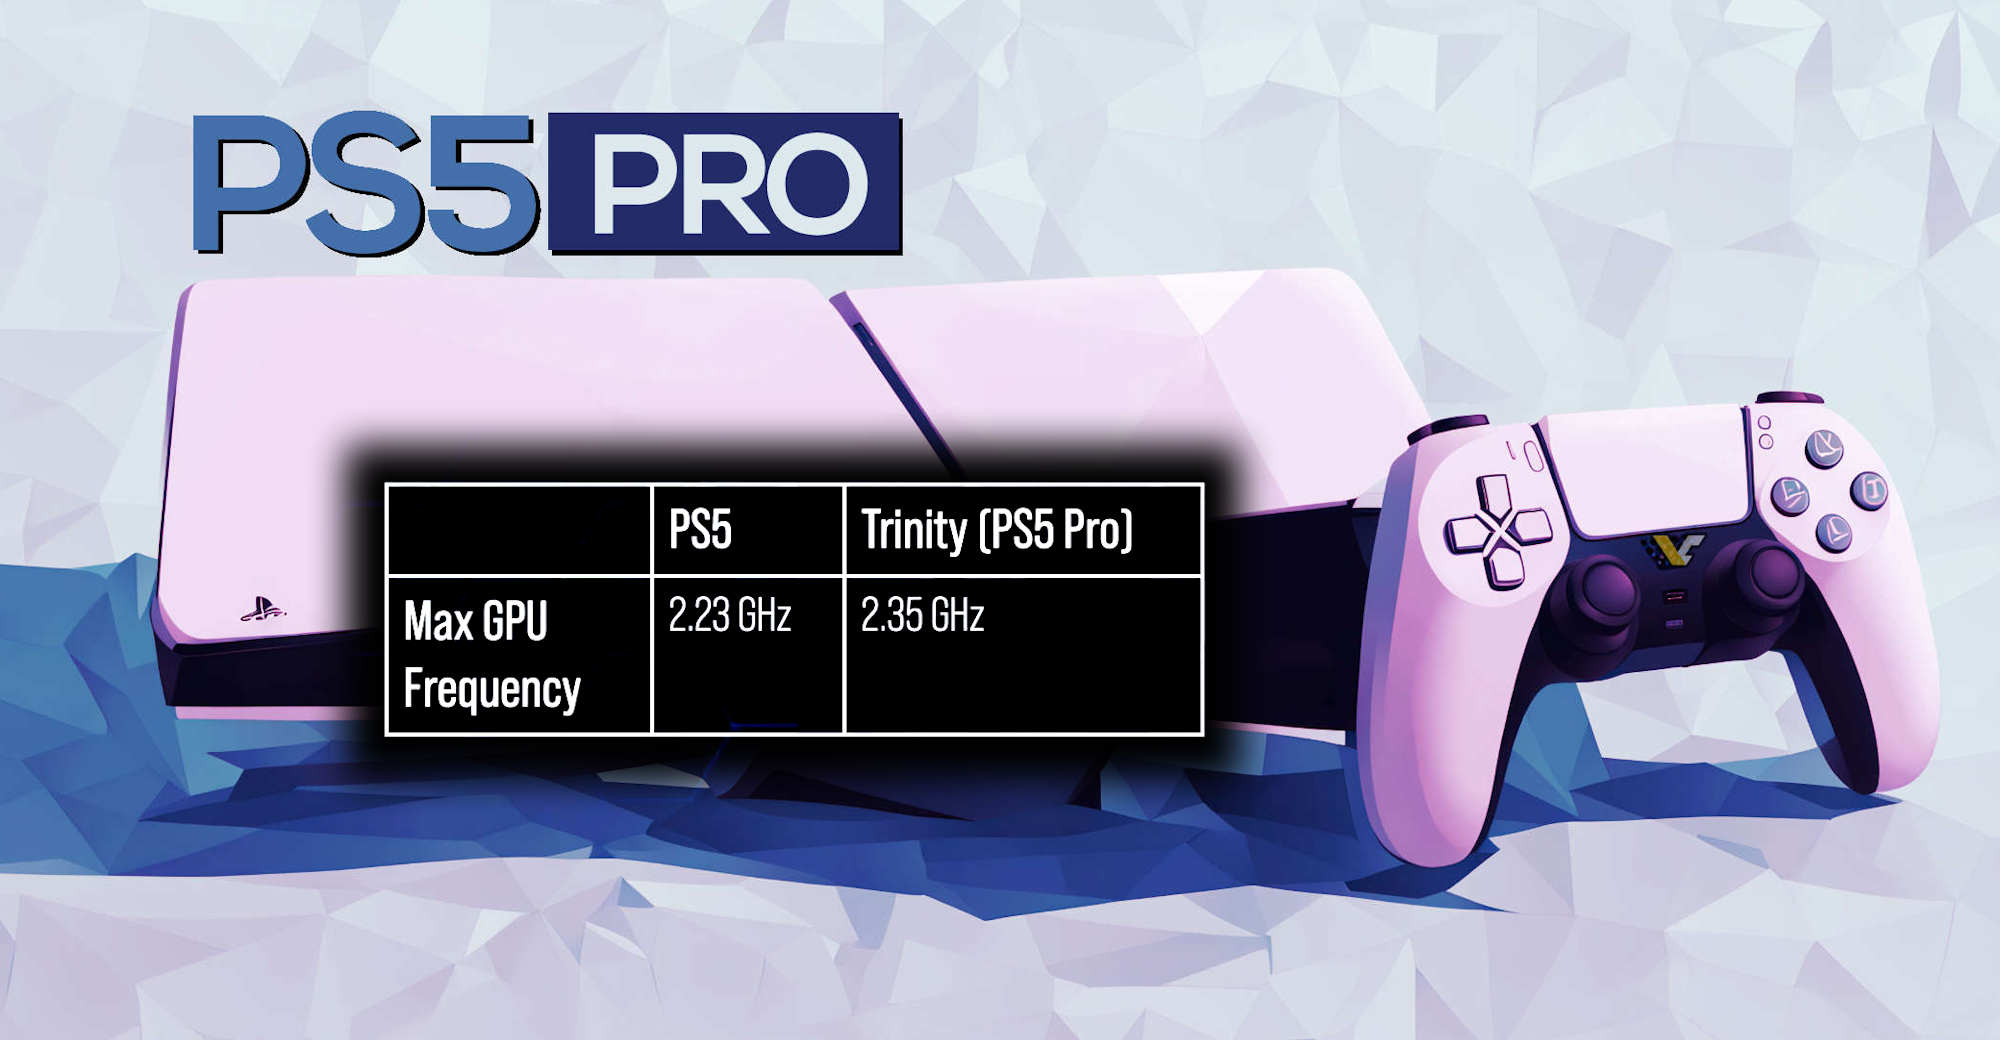 Sony PlayStation 5 Pro reportedly features max GPU clock of 2.35 